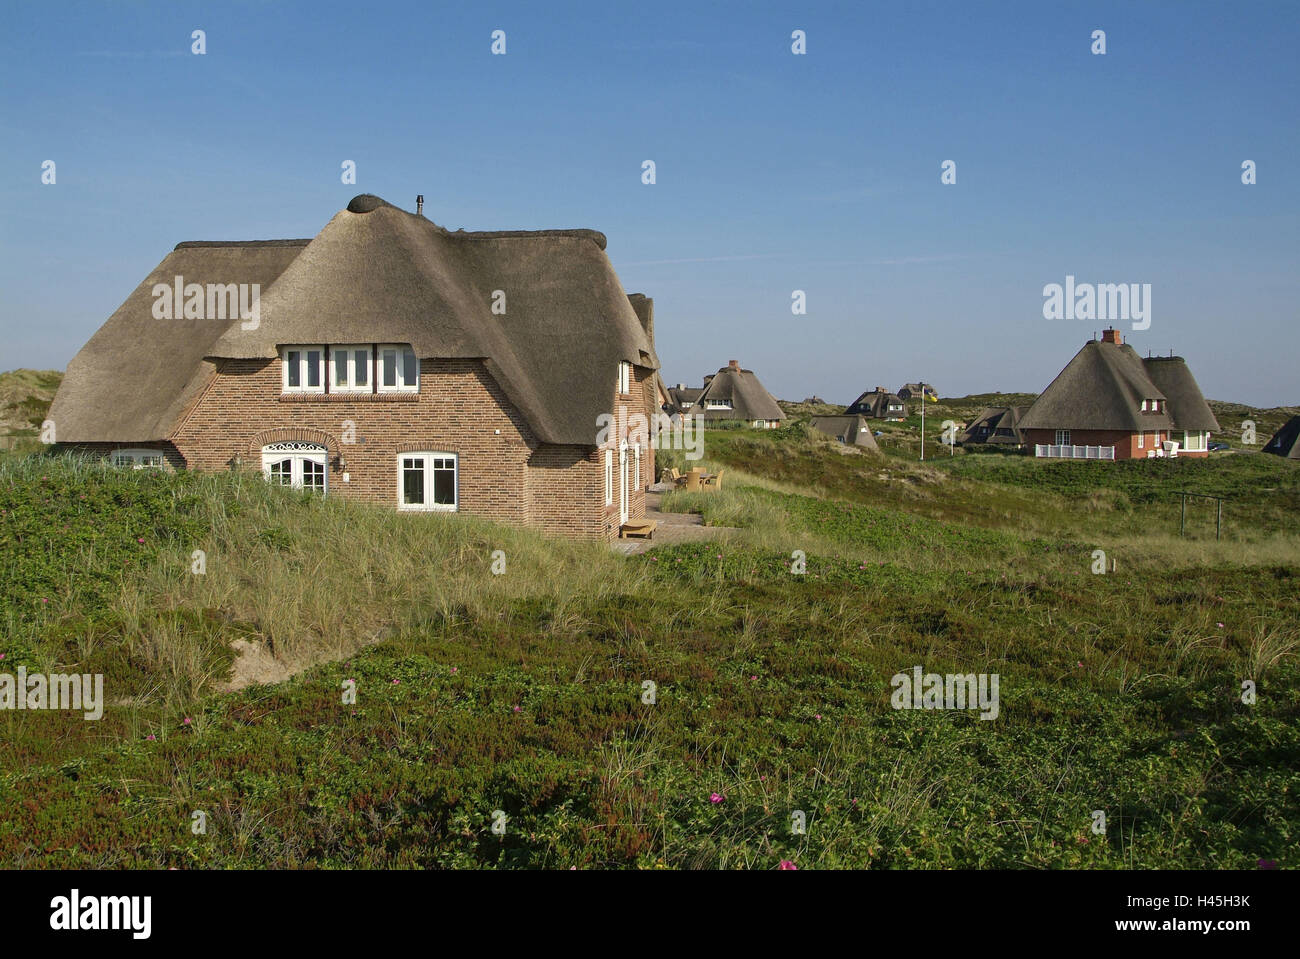 Germany, Schleswig-Holstein, island Sylt, List, thatched-roof houses, Stock Photo